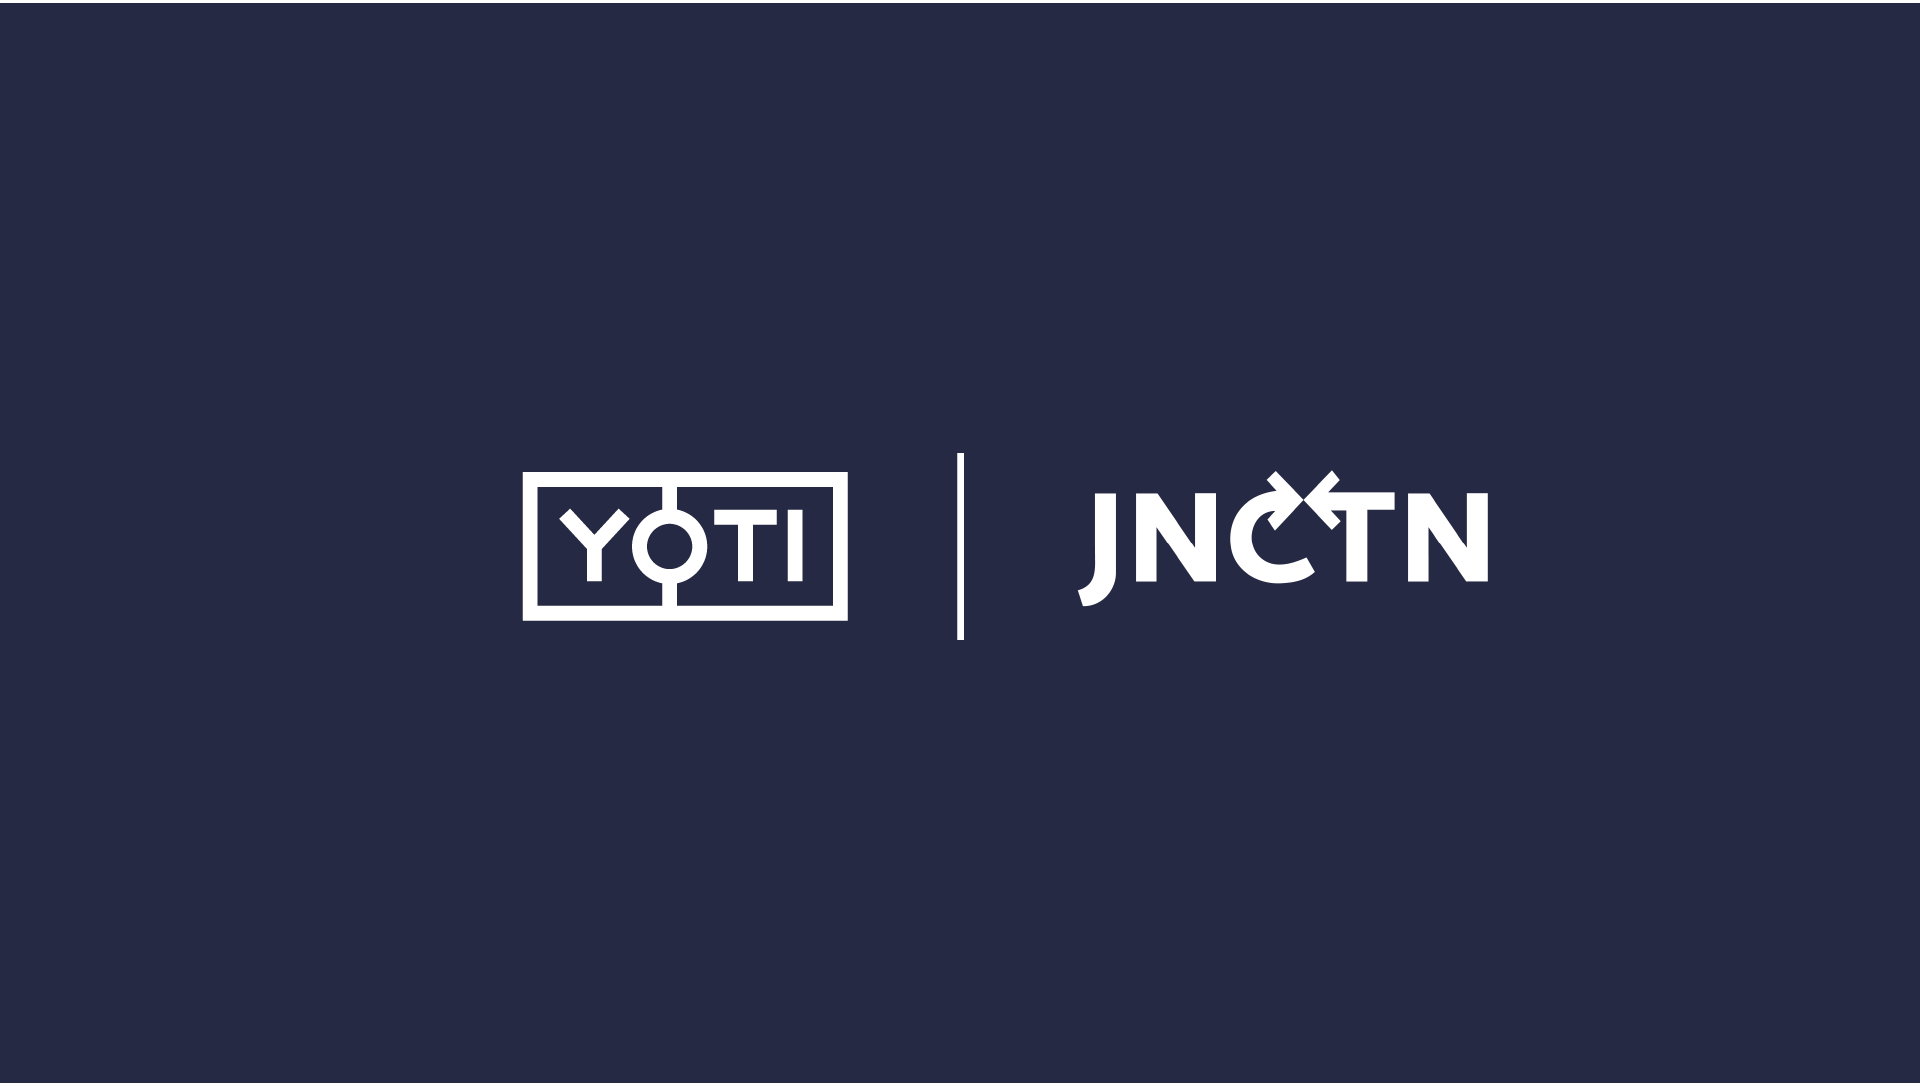 JNCTN and Yoti’s strategic partnership to provide a single verified digital identity and credential management solution